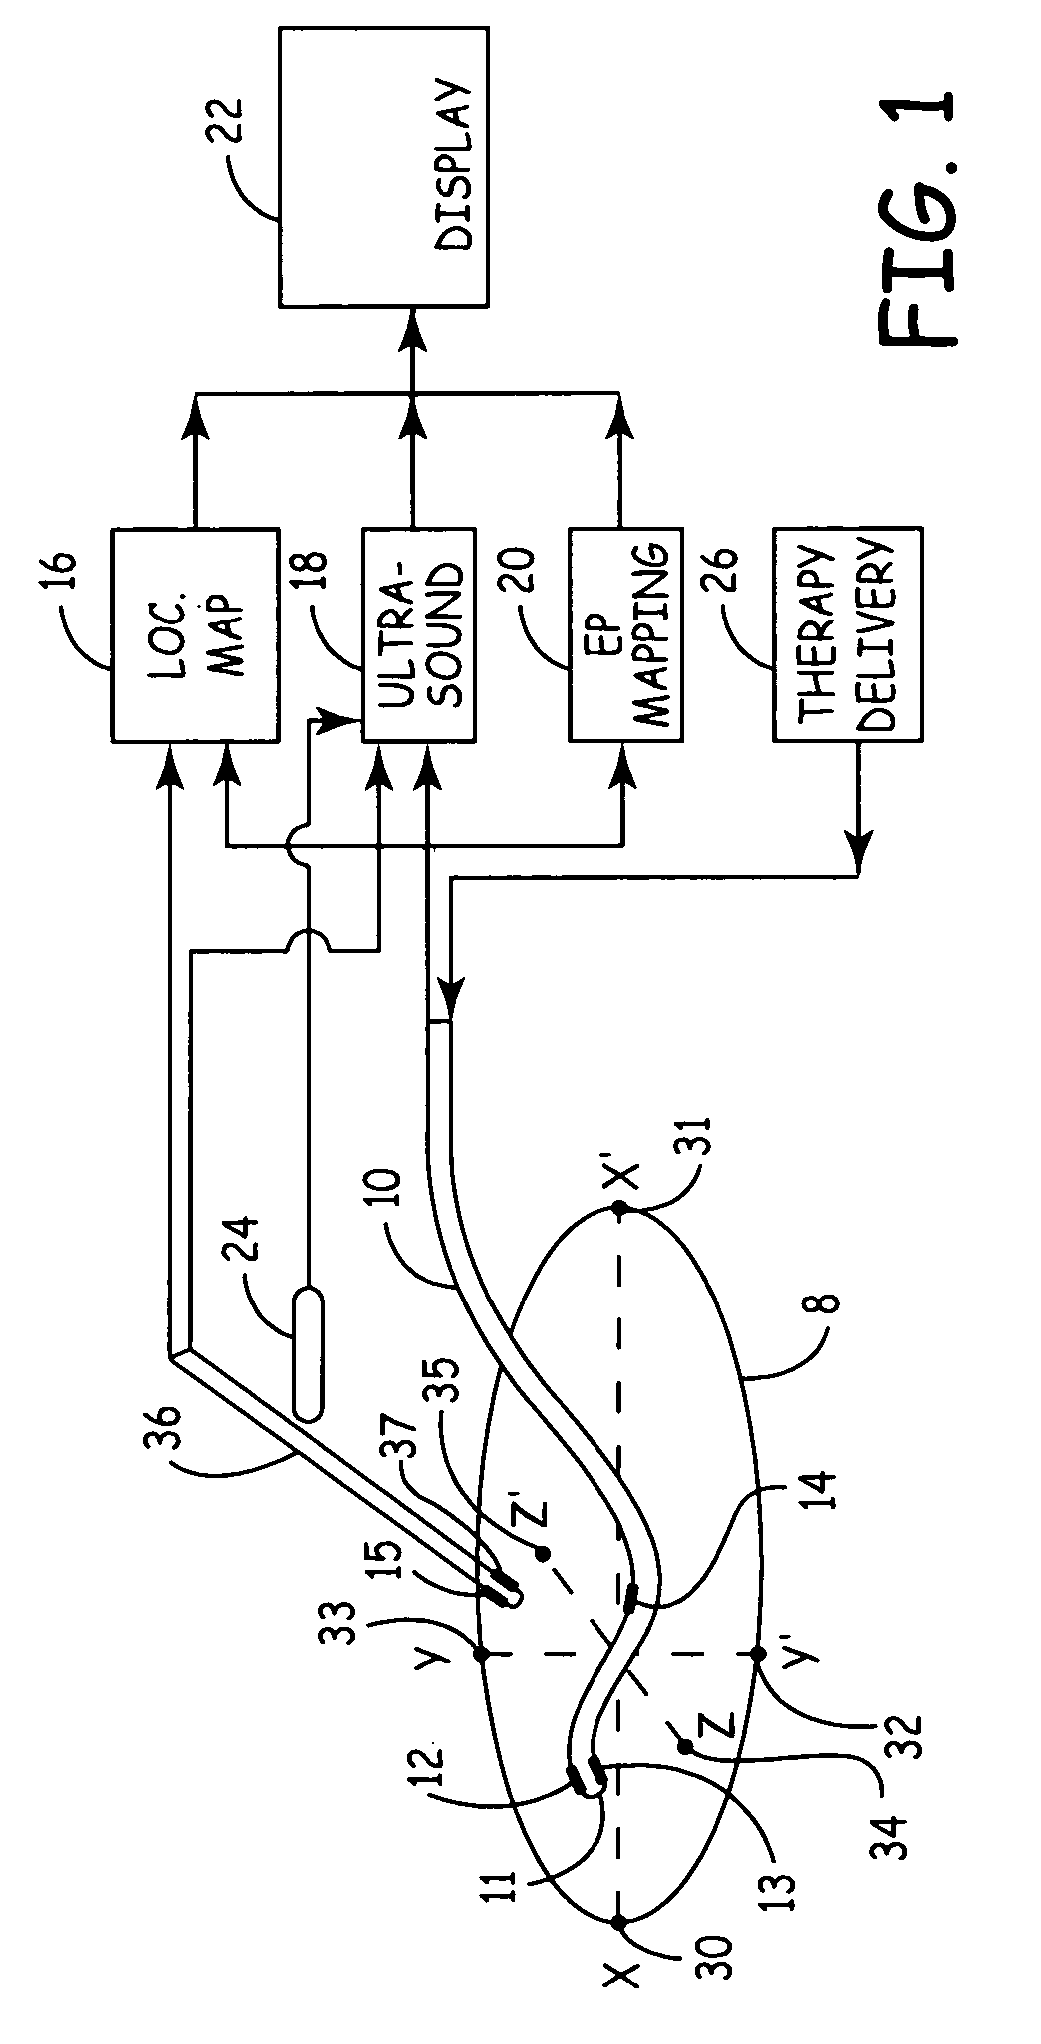 Electrode location mapping system and method